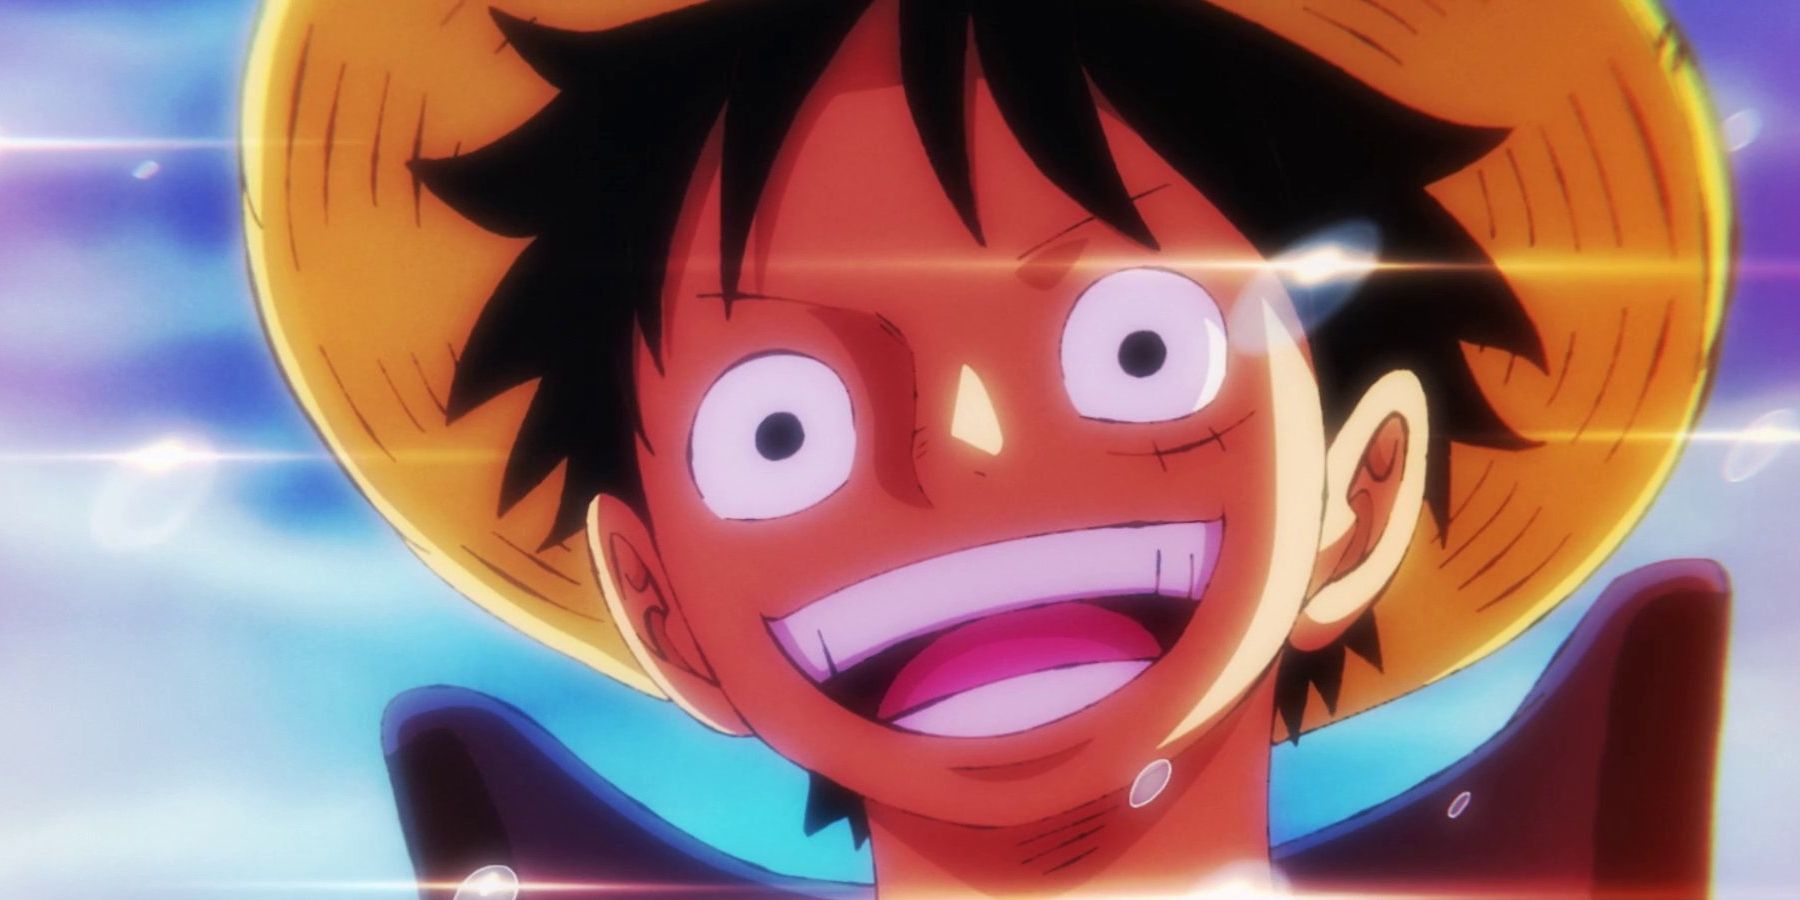 Luffy smiling in Episode 982